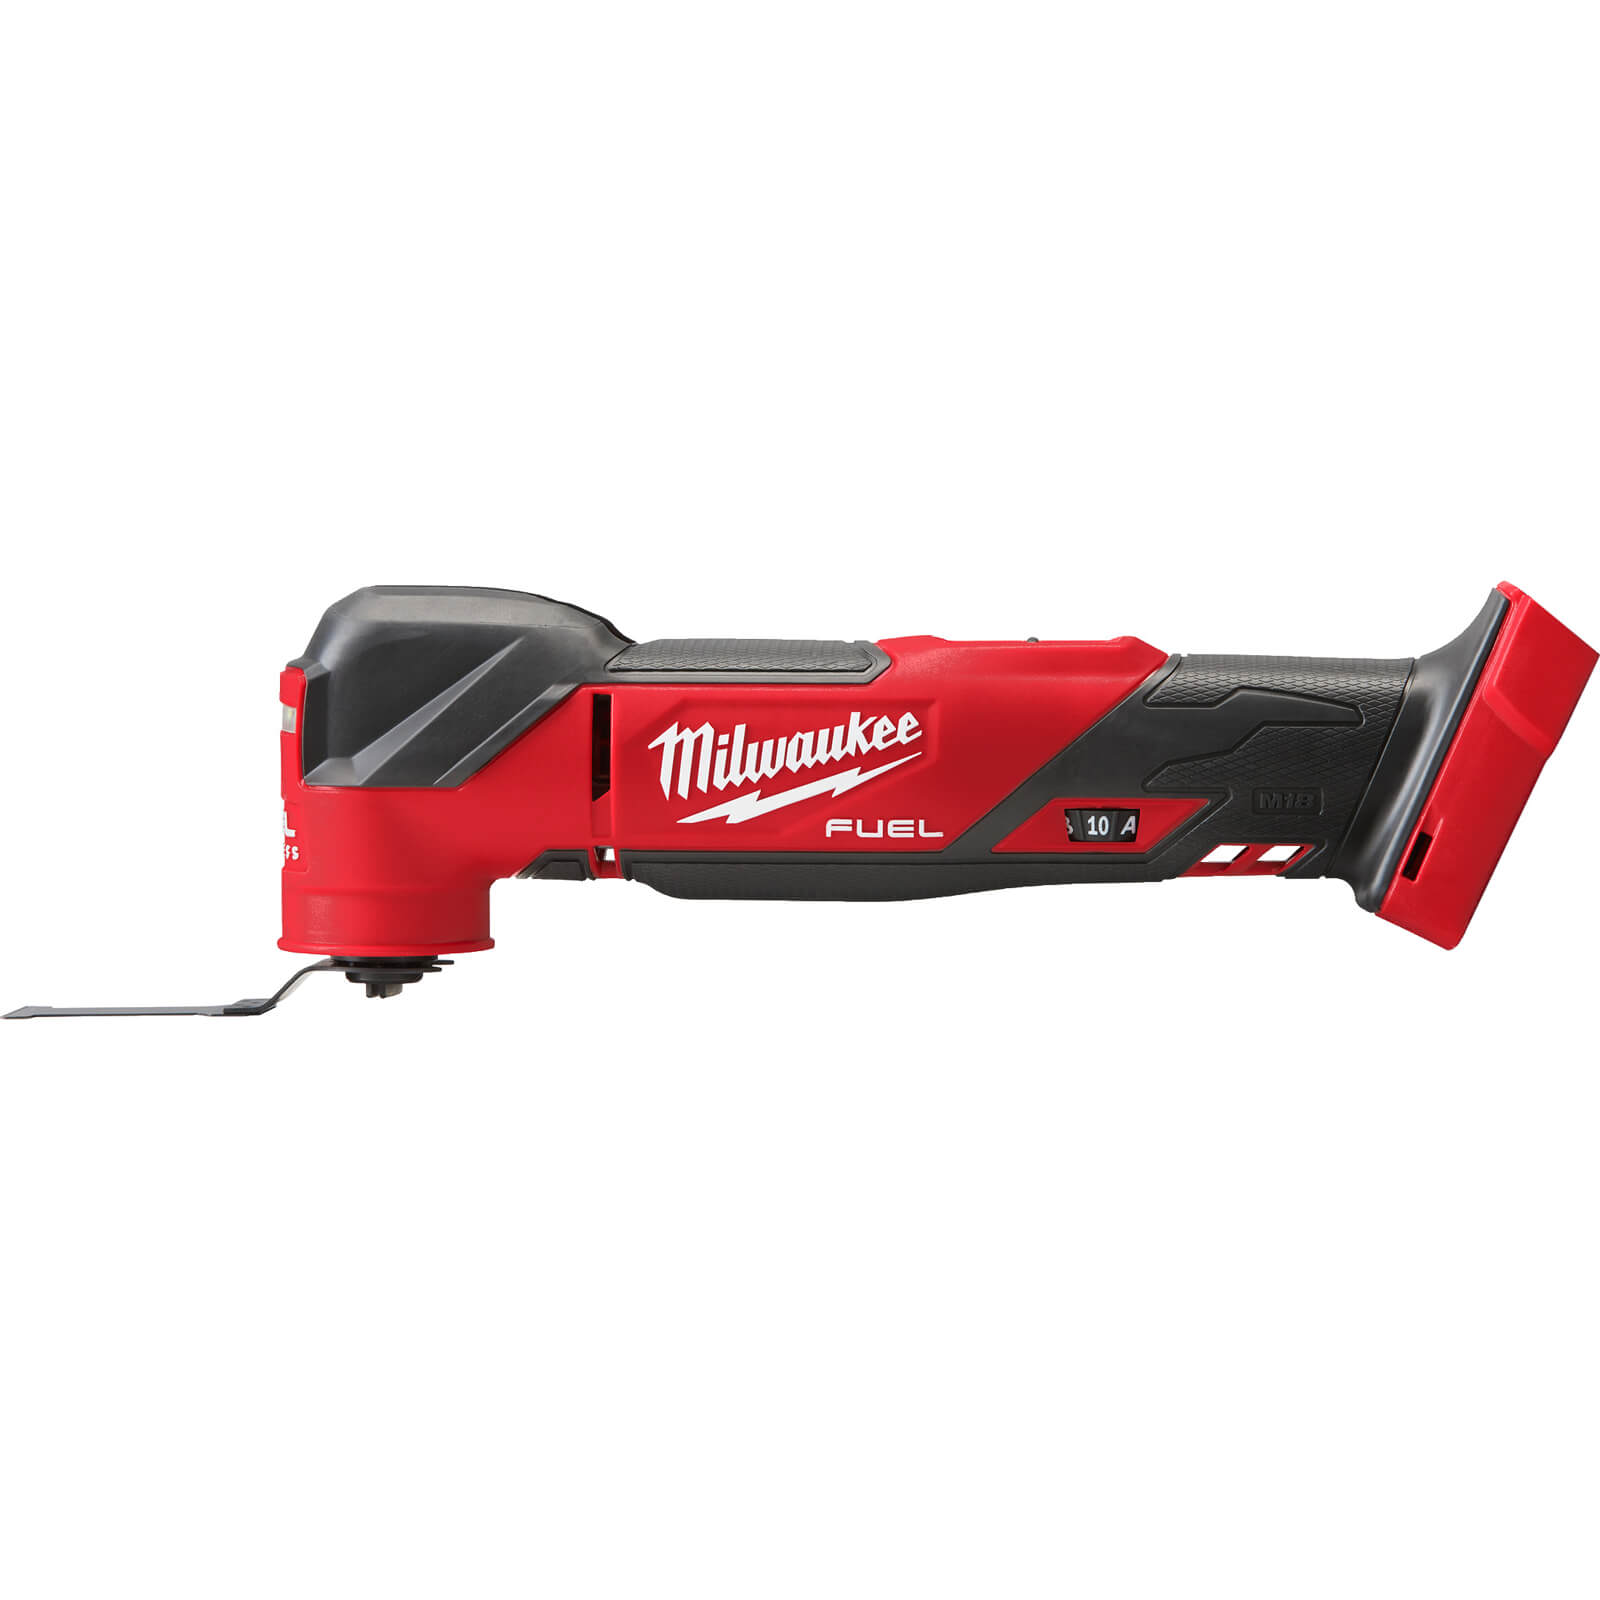 Image of Milwaukee M18 FMT Fuel 18v Cordless Brushless Oscillating Multi Tool No Batteries No Charger Case